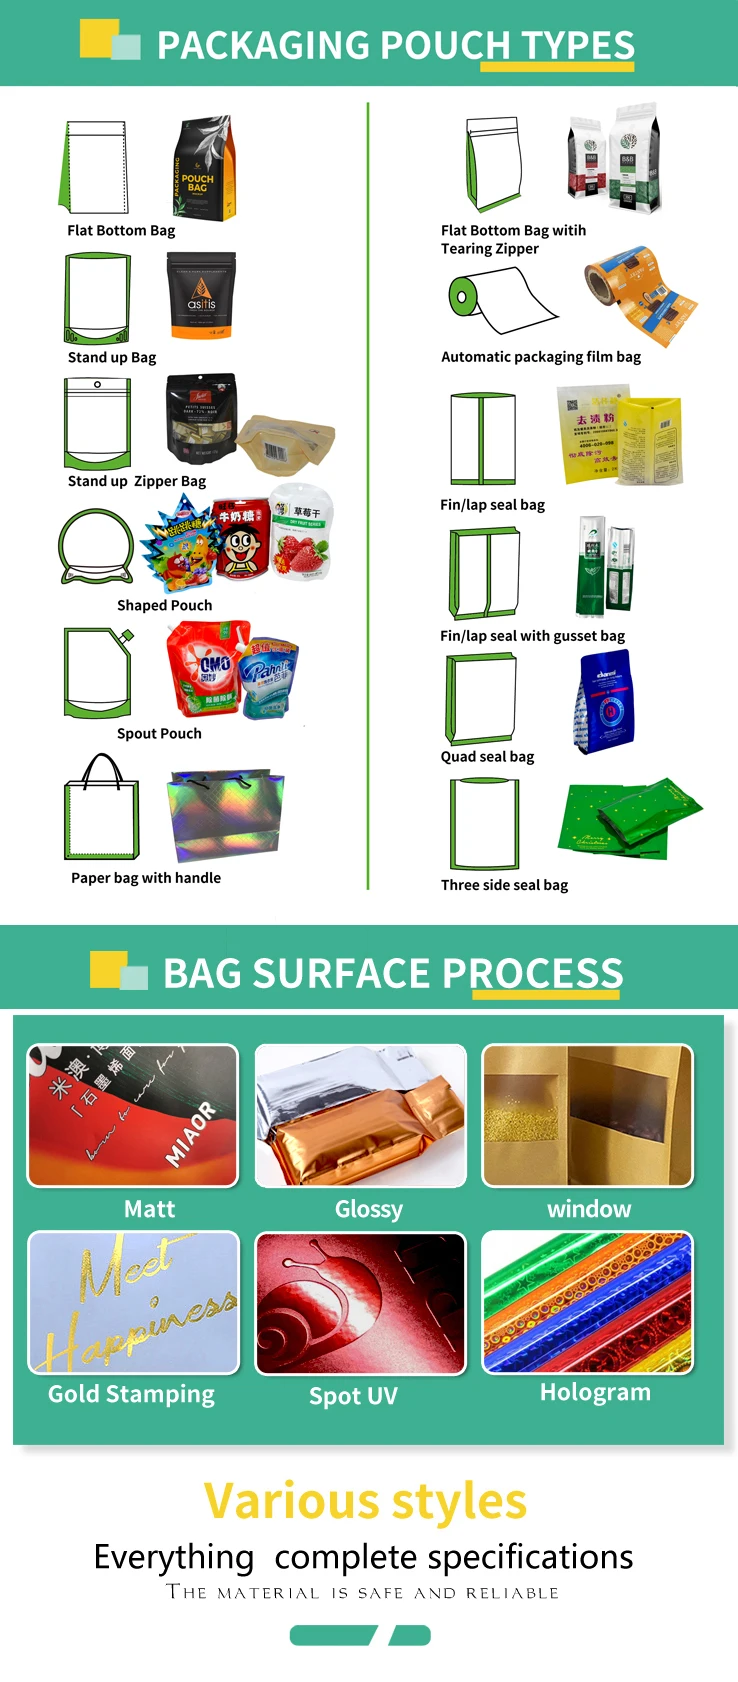 frosted zipper bag biodegradable